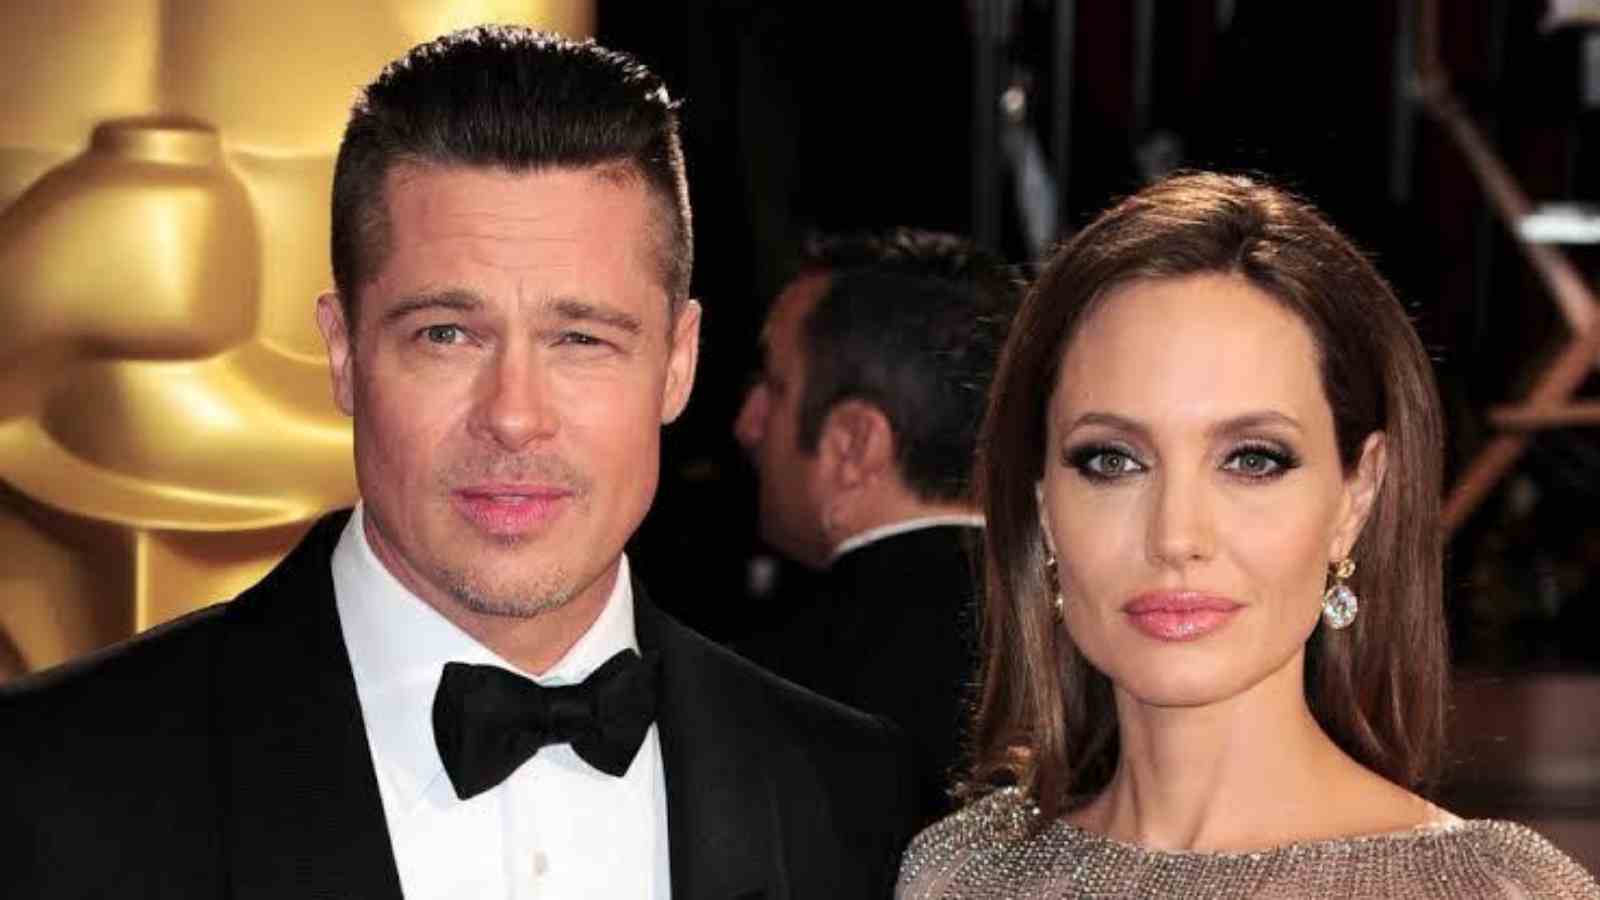 How did Angelina Jolie and Brad Pitt's relationship turn ugly?